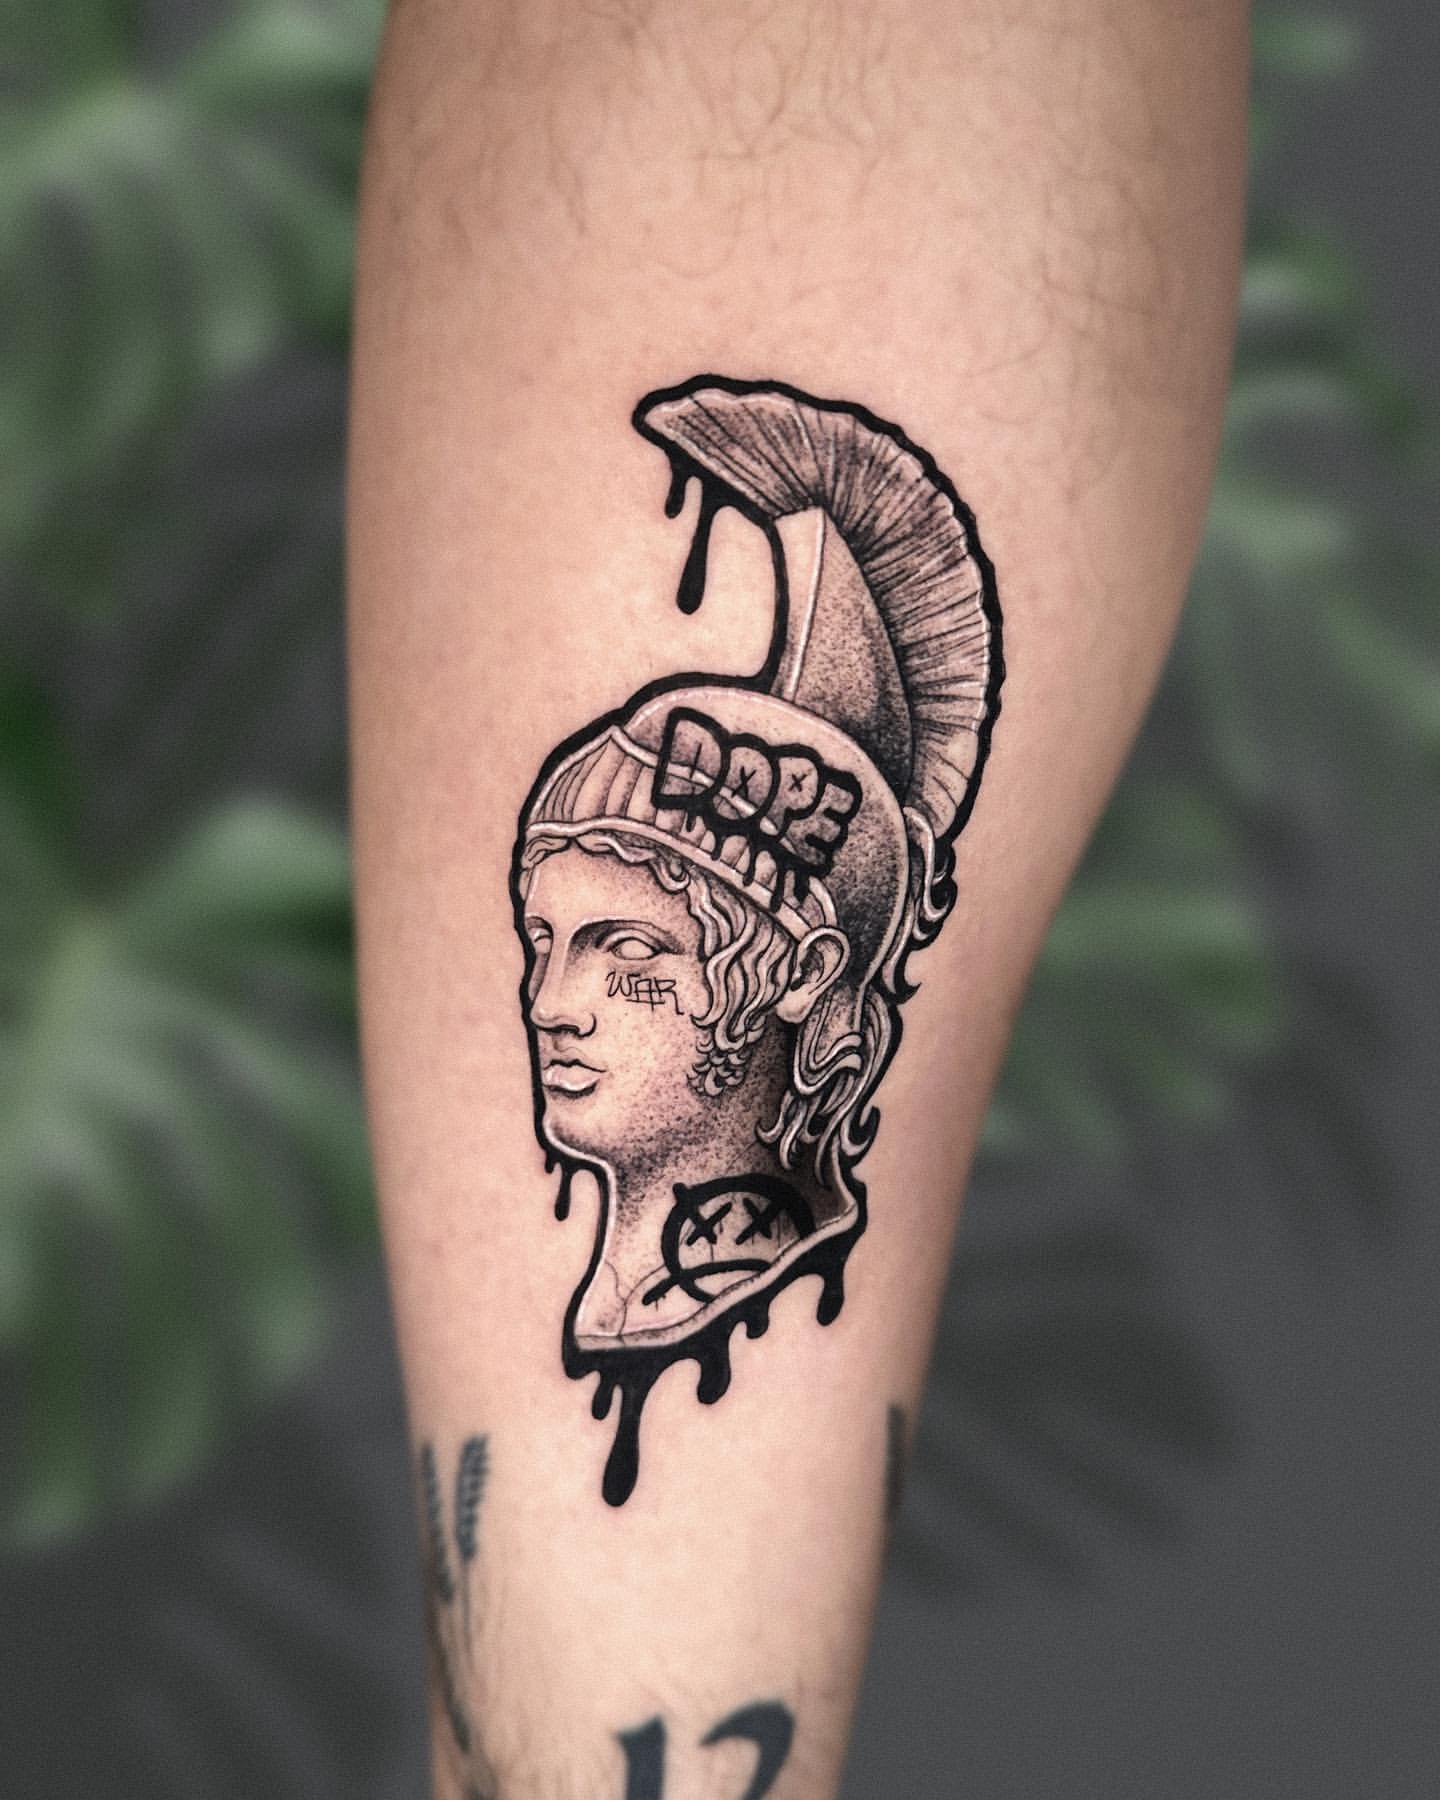 The Styles and Meanings Behind Greek Mythology Tattoos | Greek tattoos,  Body tattoos, Athena tattoo